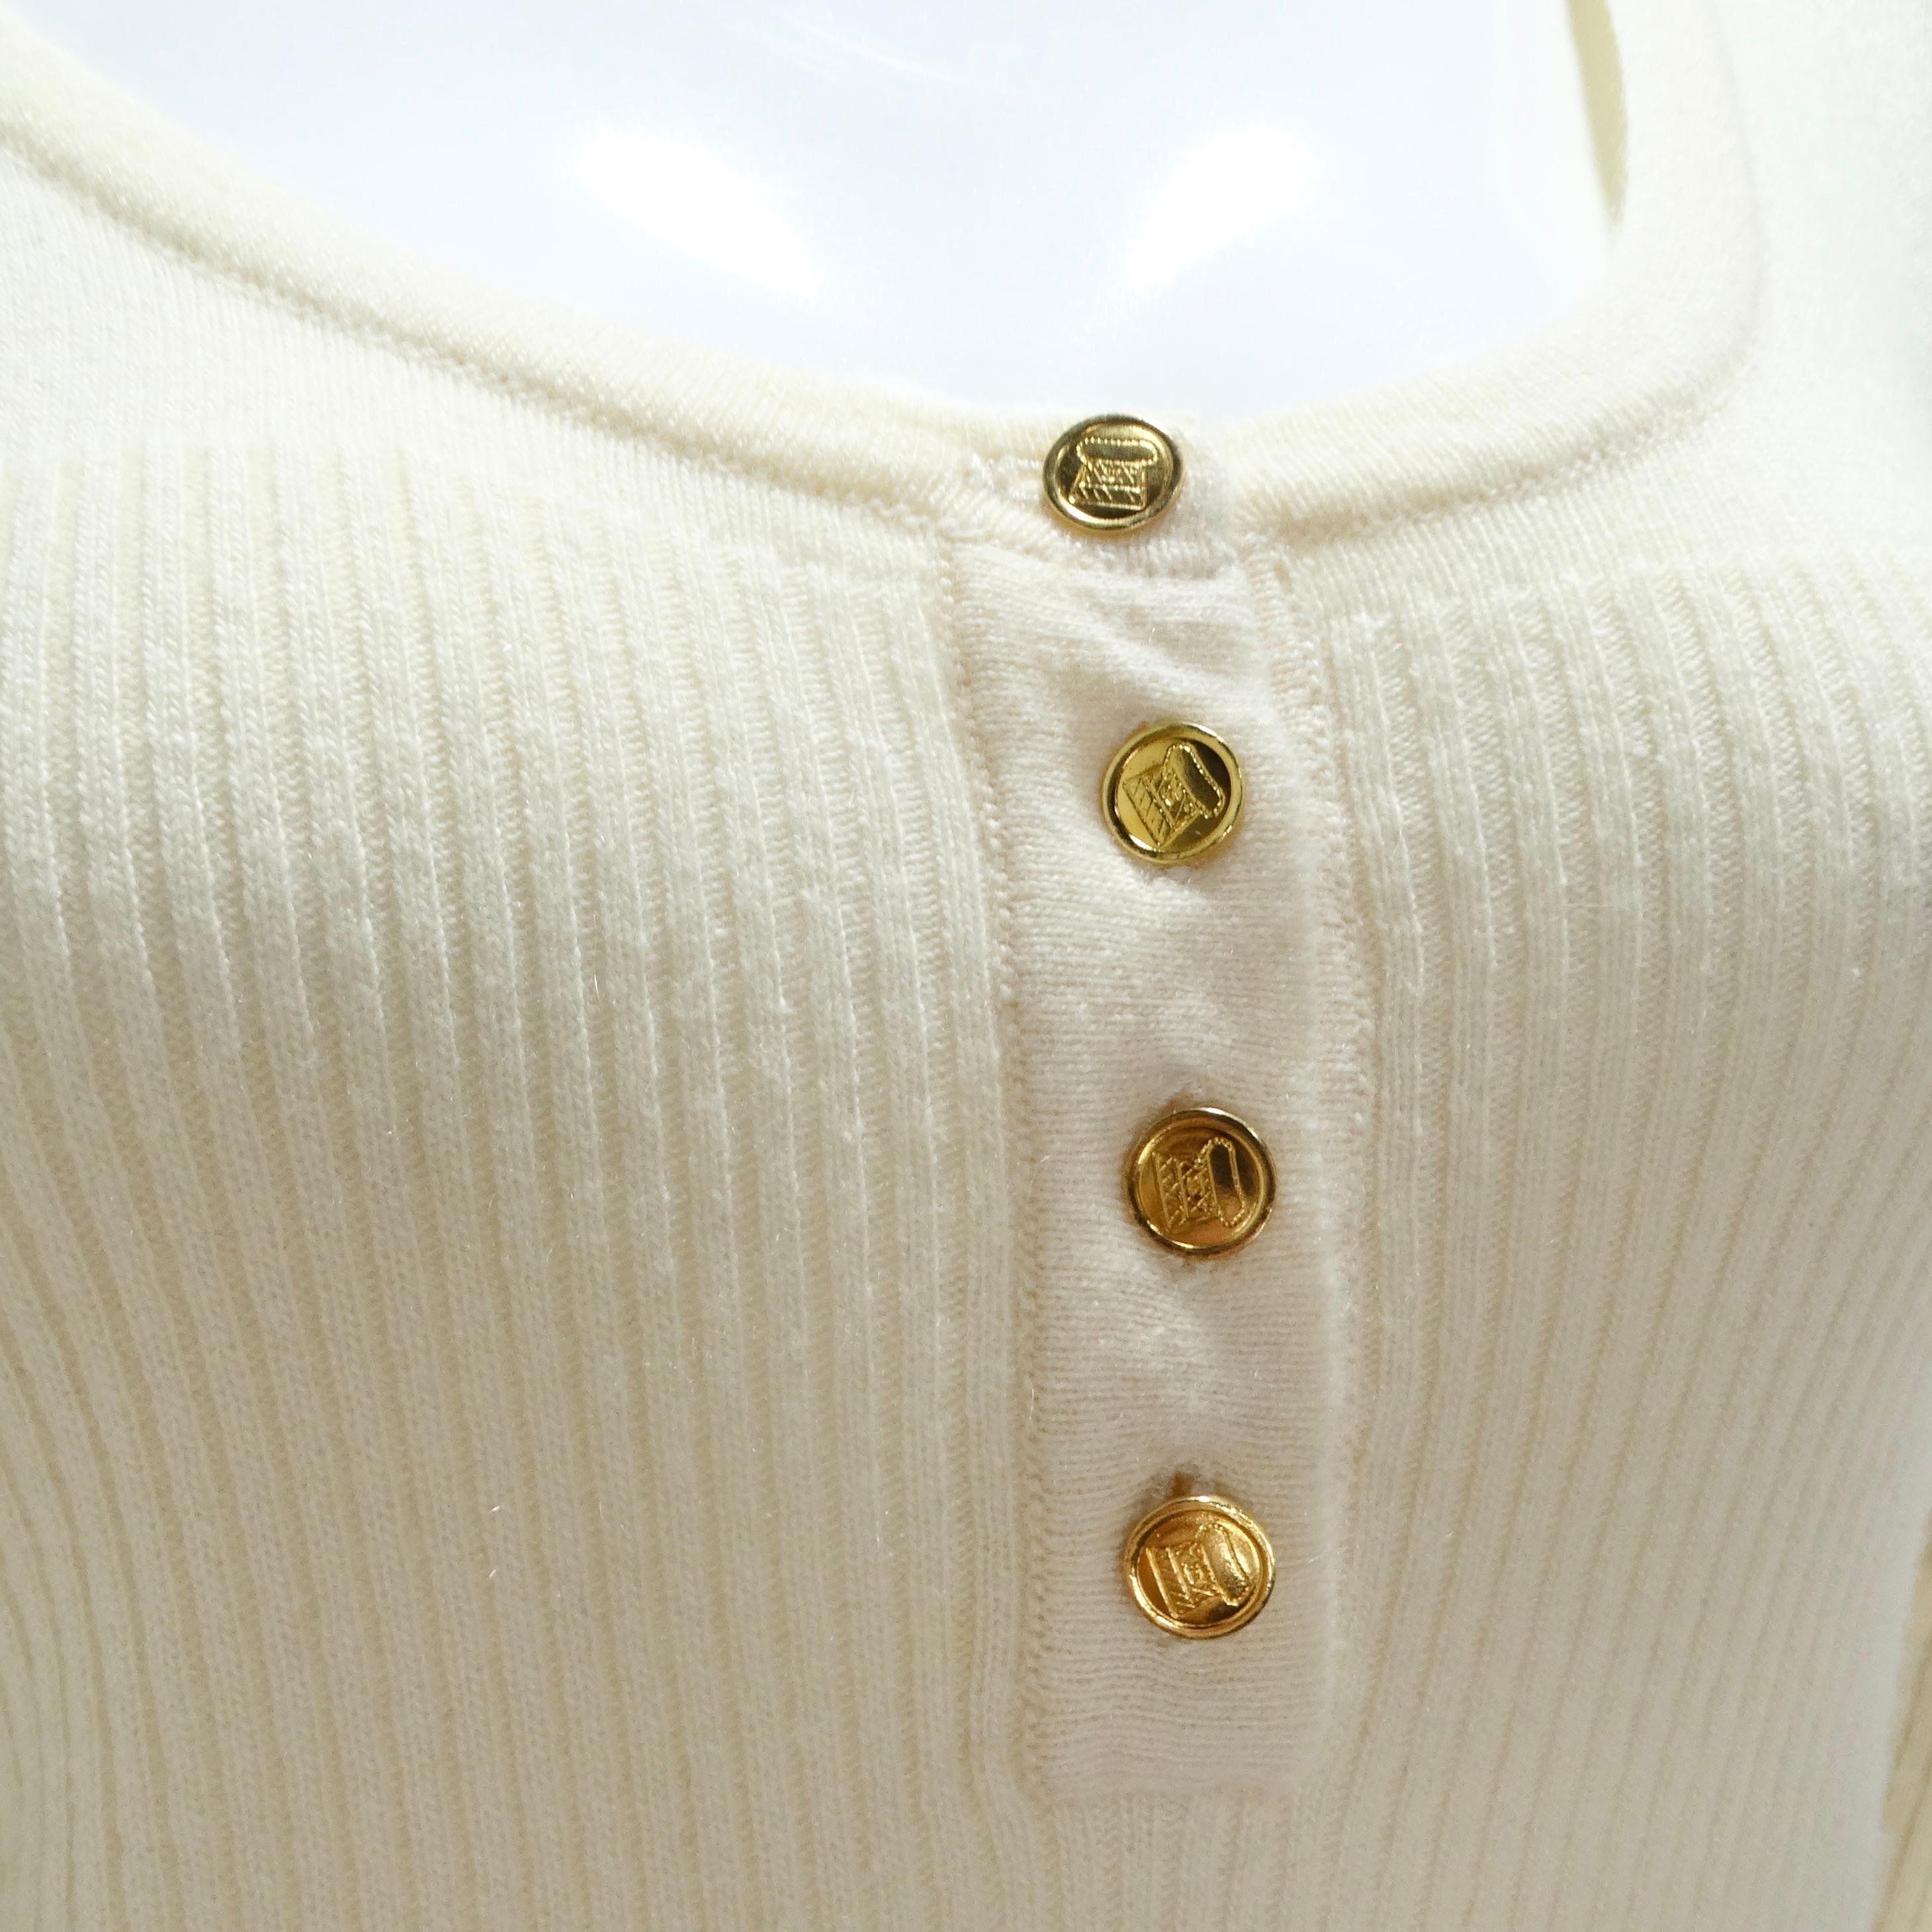 Chanel 1990s Ruffle Trim Tie Knit Cashmere Sweater  In Excellent Condition For Sale In Scottsdale, AZ